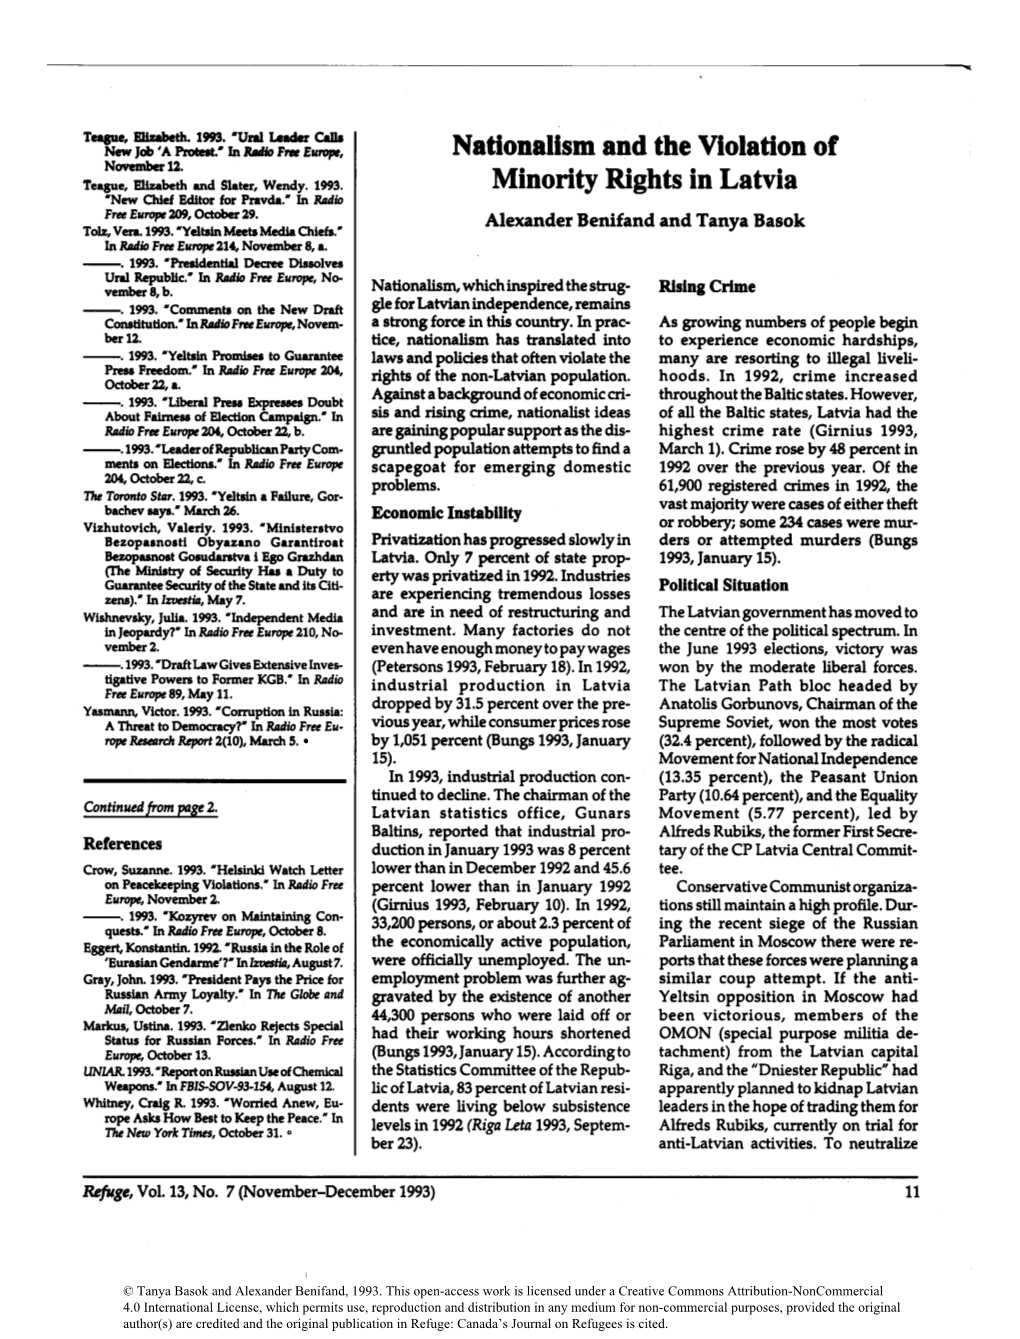 Nationalism and the Violation of Minority Rights in Latvia